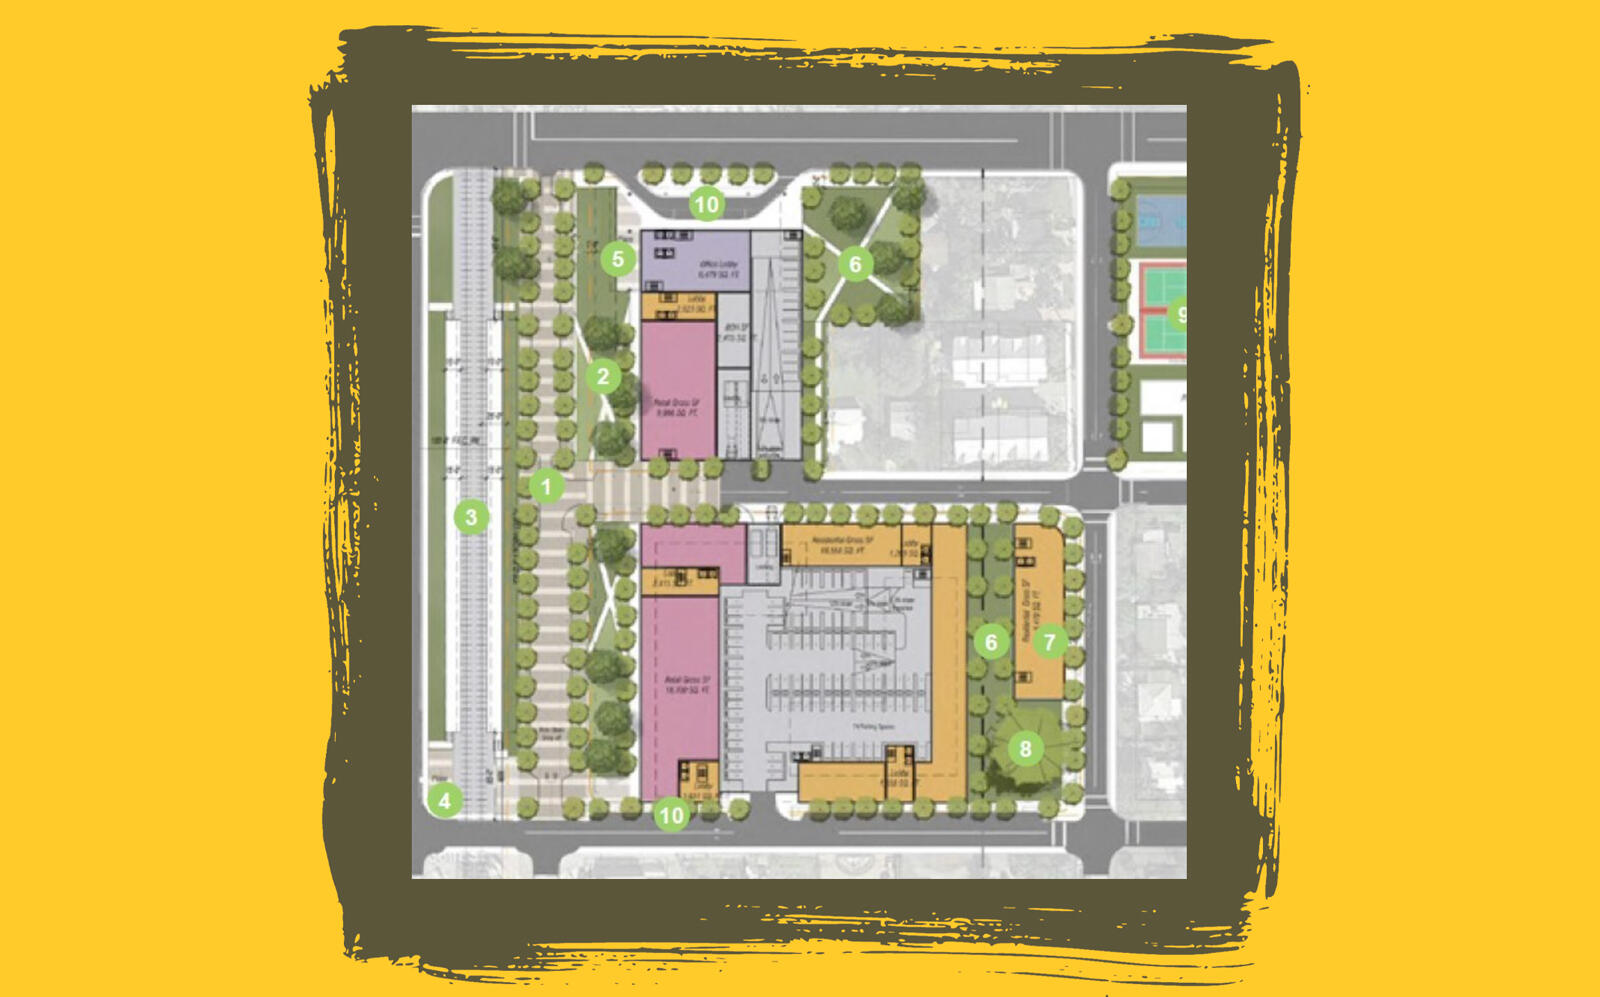 A conceptual site plan to redevelop the current Oakland Park City Hall property